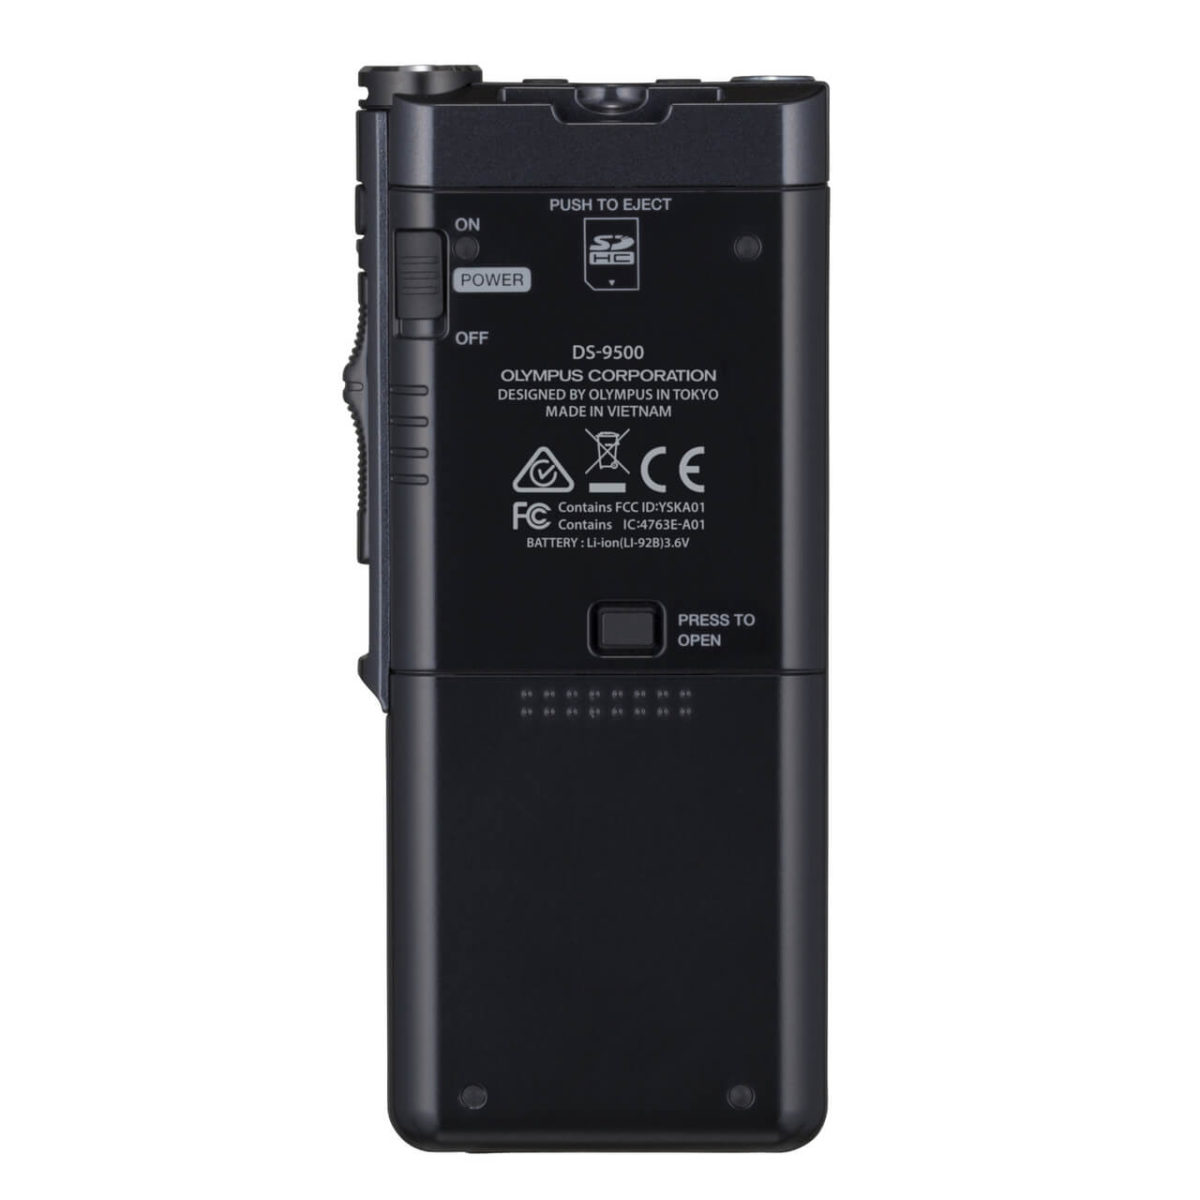 Olympus DS-9500 Digital Voice Recorder with ODMS Release 7 Software